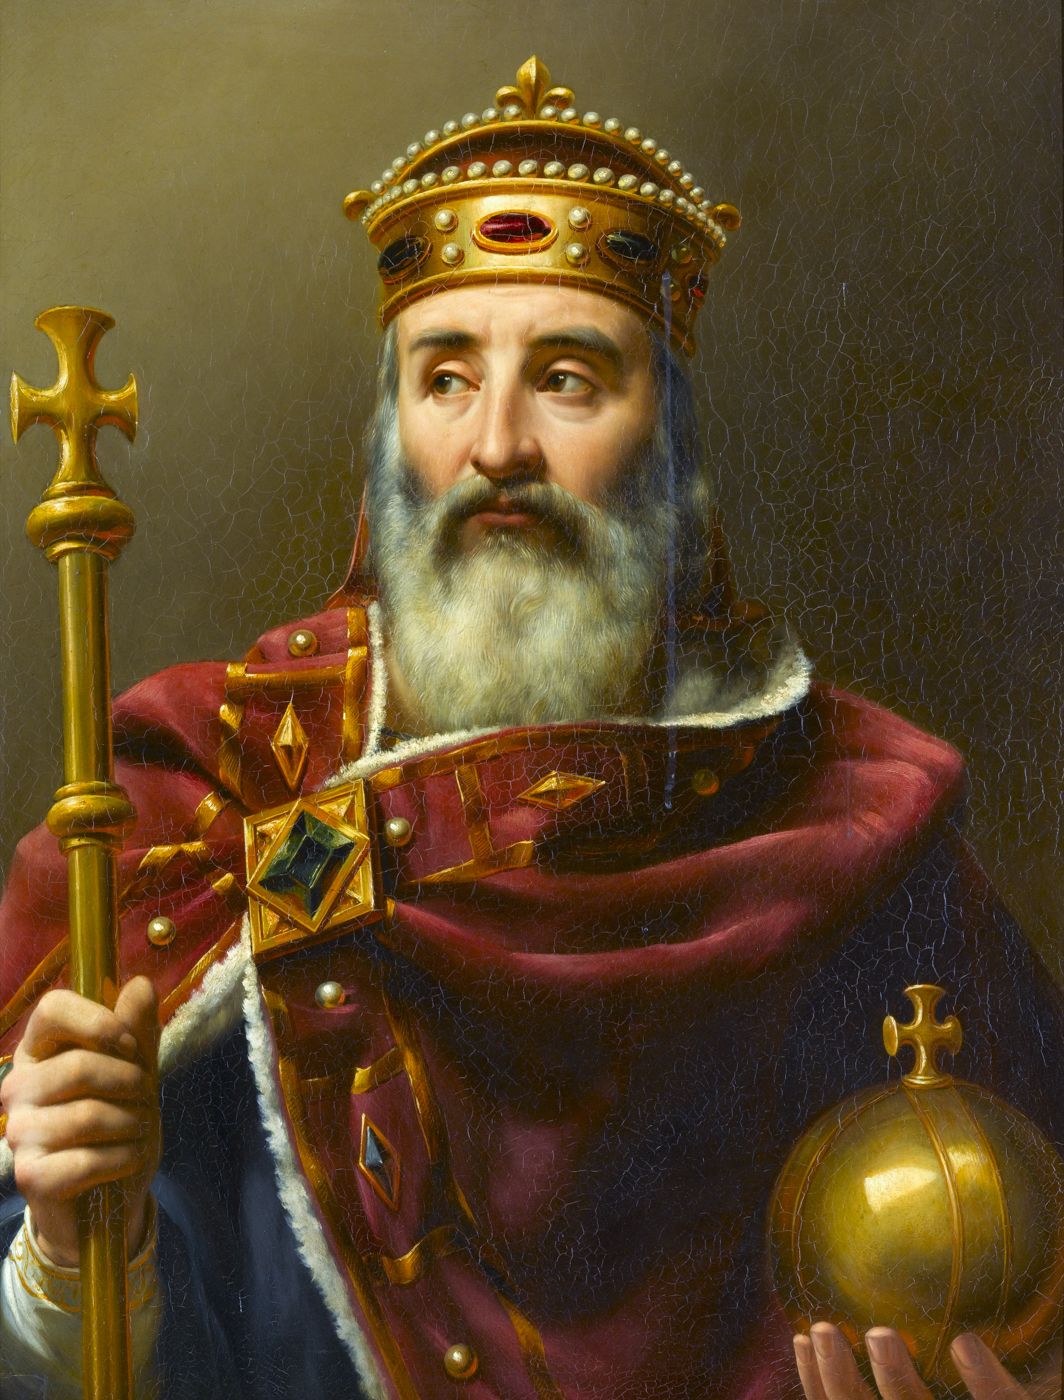 <ul><li><p>Charlemagne united most of Western Europe for the first time since the fall of the Roman Empire under his rule with the power of the sword</p></li><li><p>Charlemagne was the first emperor of the Holy Roman Empire</p></li><li><p>He supported education by establishing schools and promoting literacy throughout his kingdom (wanted his people to be literate)</p></li><li><p>He conquered many lands and was known as the warrior king</p></li><li><p>He protected the papacy</p></li><li><p>He facilitated a cultural (art, architecture) and intellectual (scholarship, literature) Carolingian renaissance with long-lasting effects</p></li></ul>